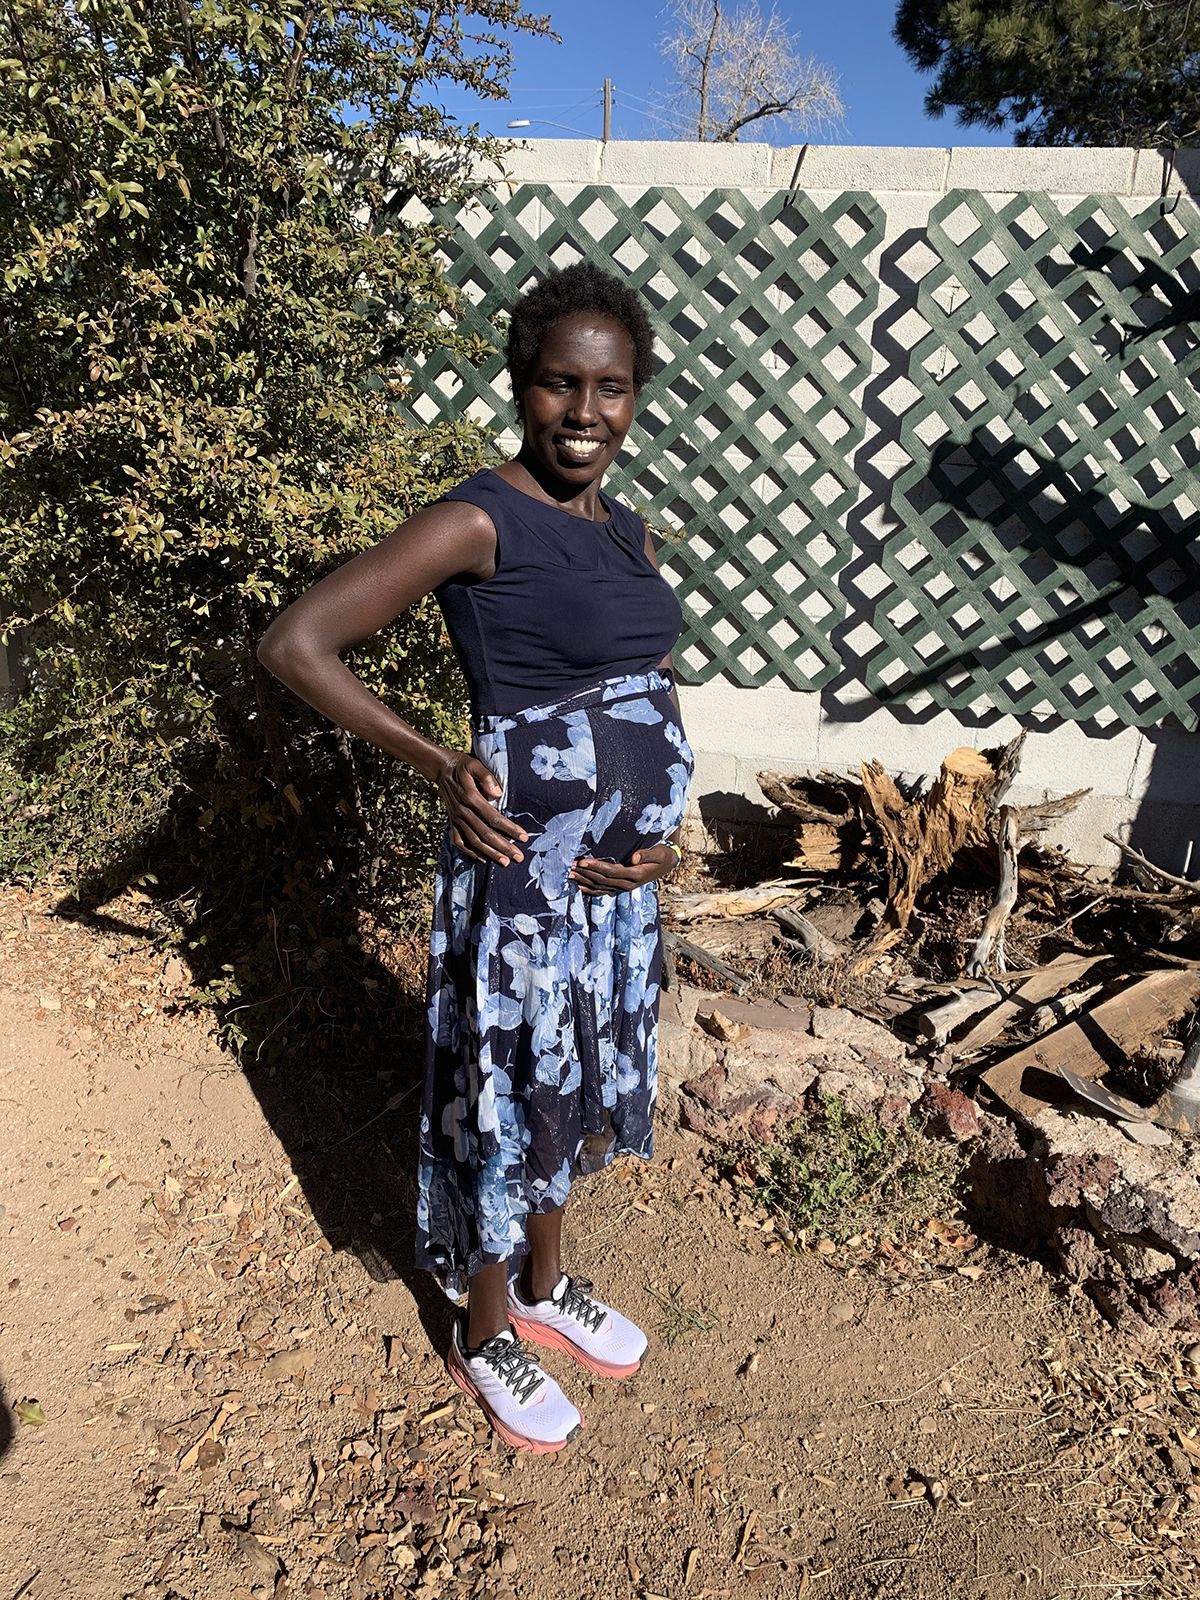 Aliphine Tuliamuk on X: At 36 wks pregnant any running is a bonus.  Somedays I think it's the last, others like today, my body feels amazing  leaving me wondering how much longer